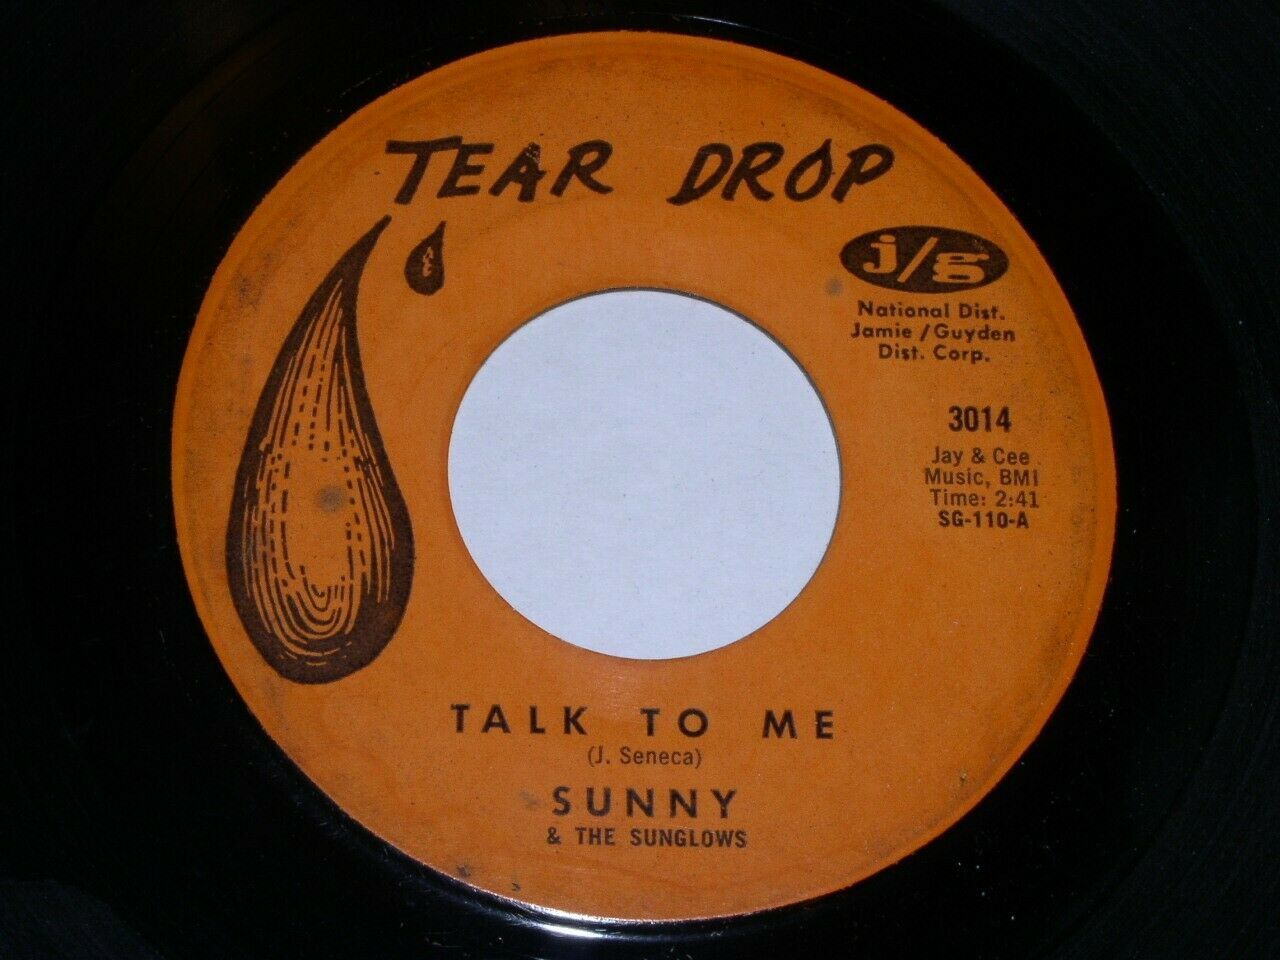 Primary image for Sunny Sunglows Rare j/g Teardrop Label Variation 45 Rpm Record Talk To Me